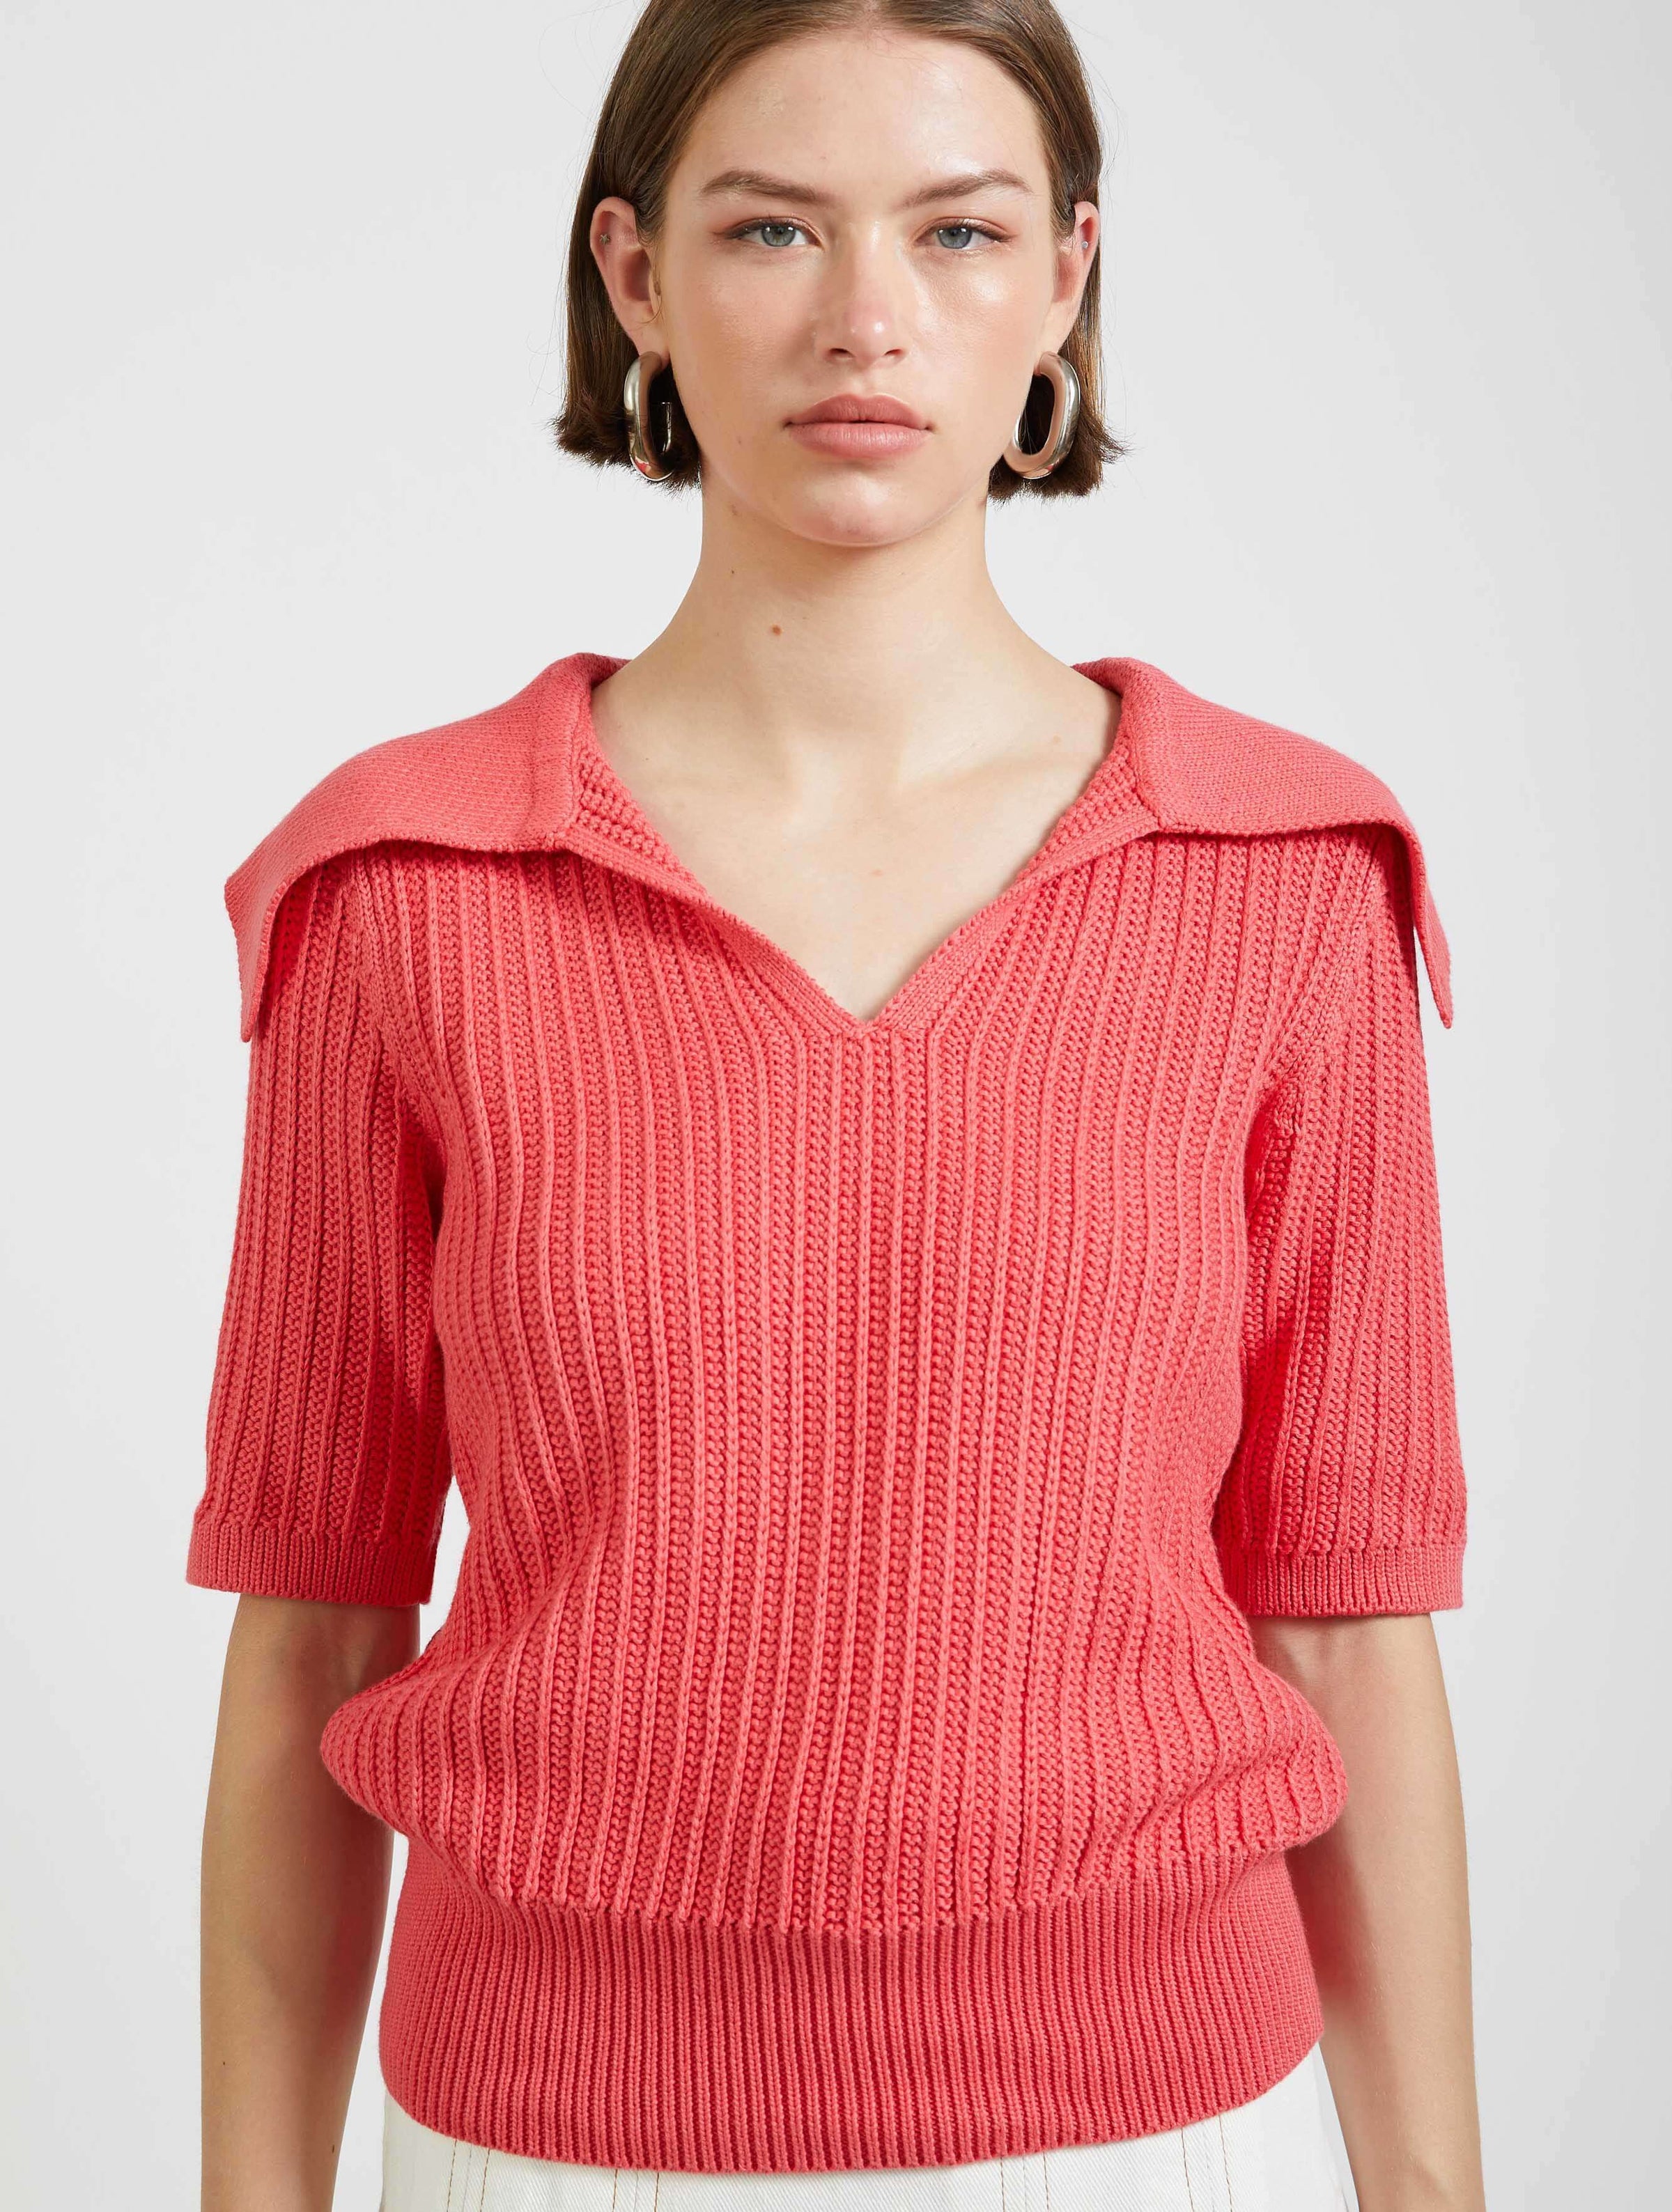 Collared Knit Top in Coral Pink